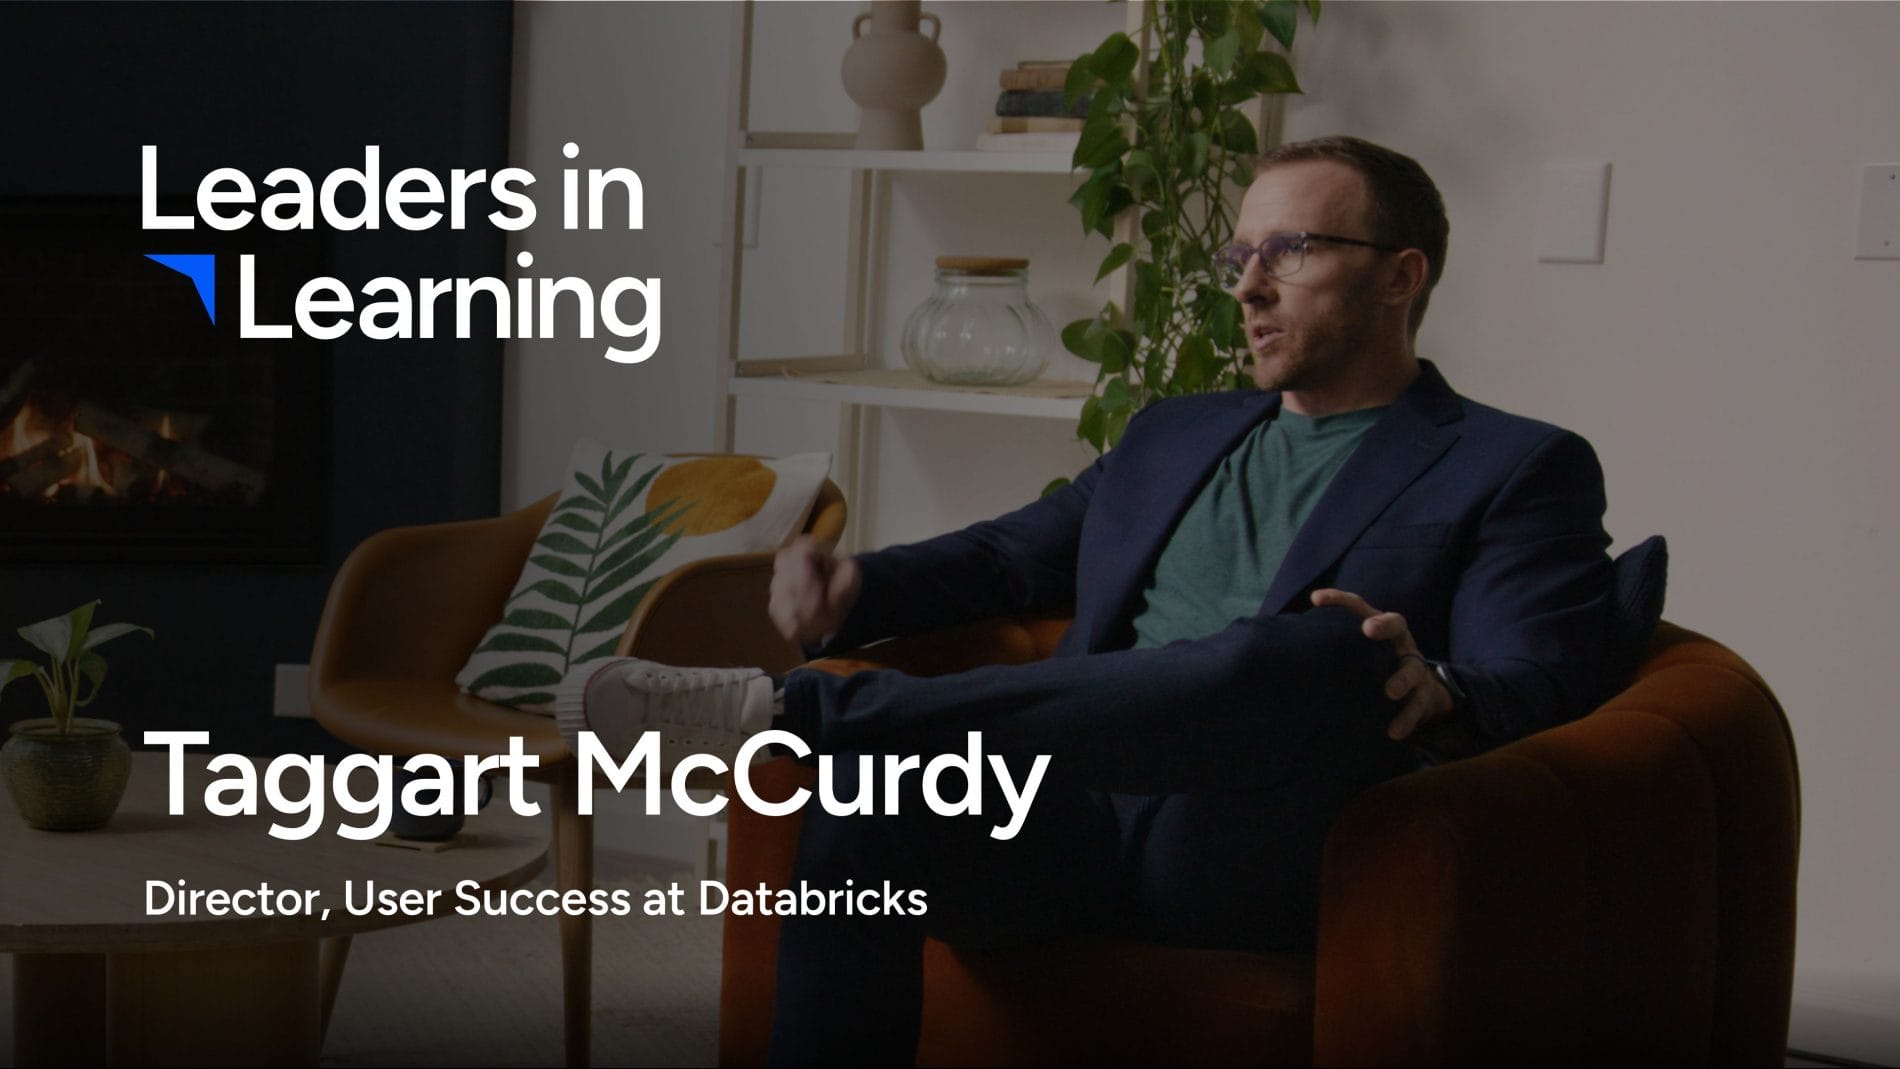 Episode 2: Taggart McCurdy gets real about artificial intelligence